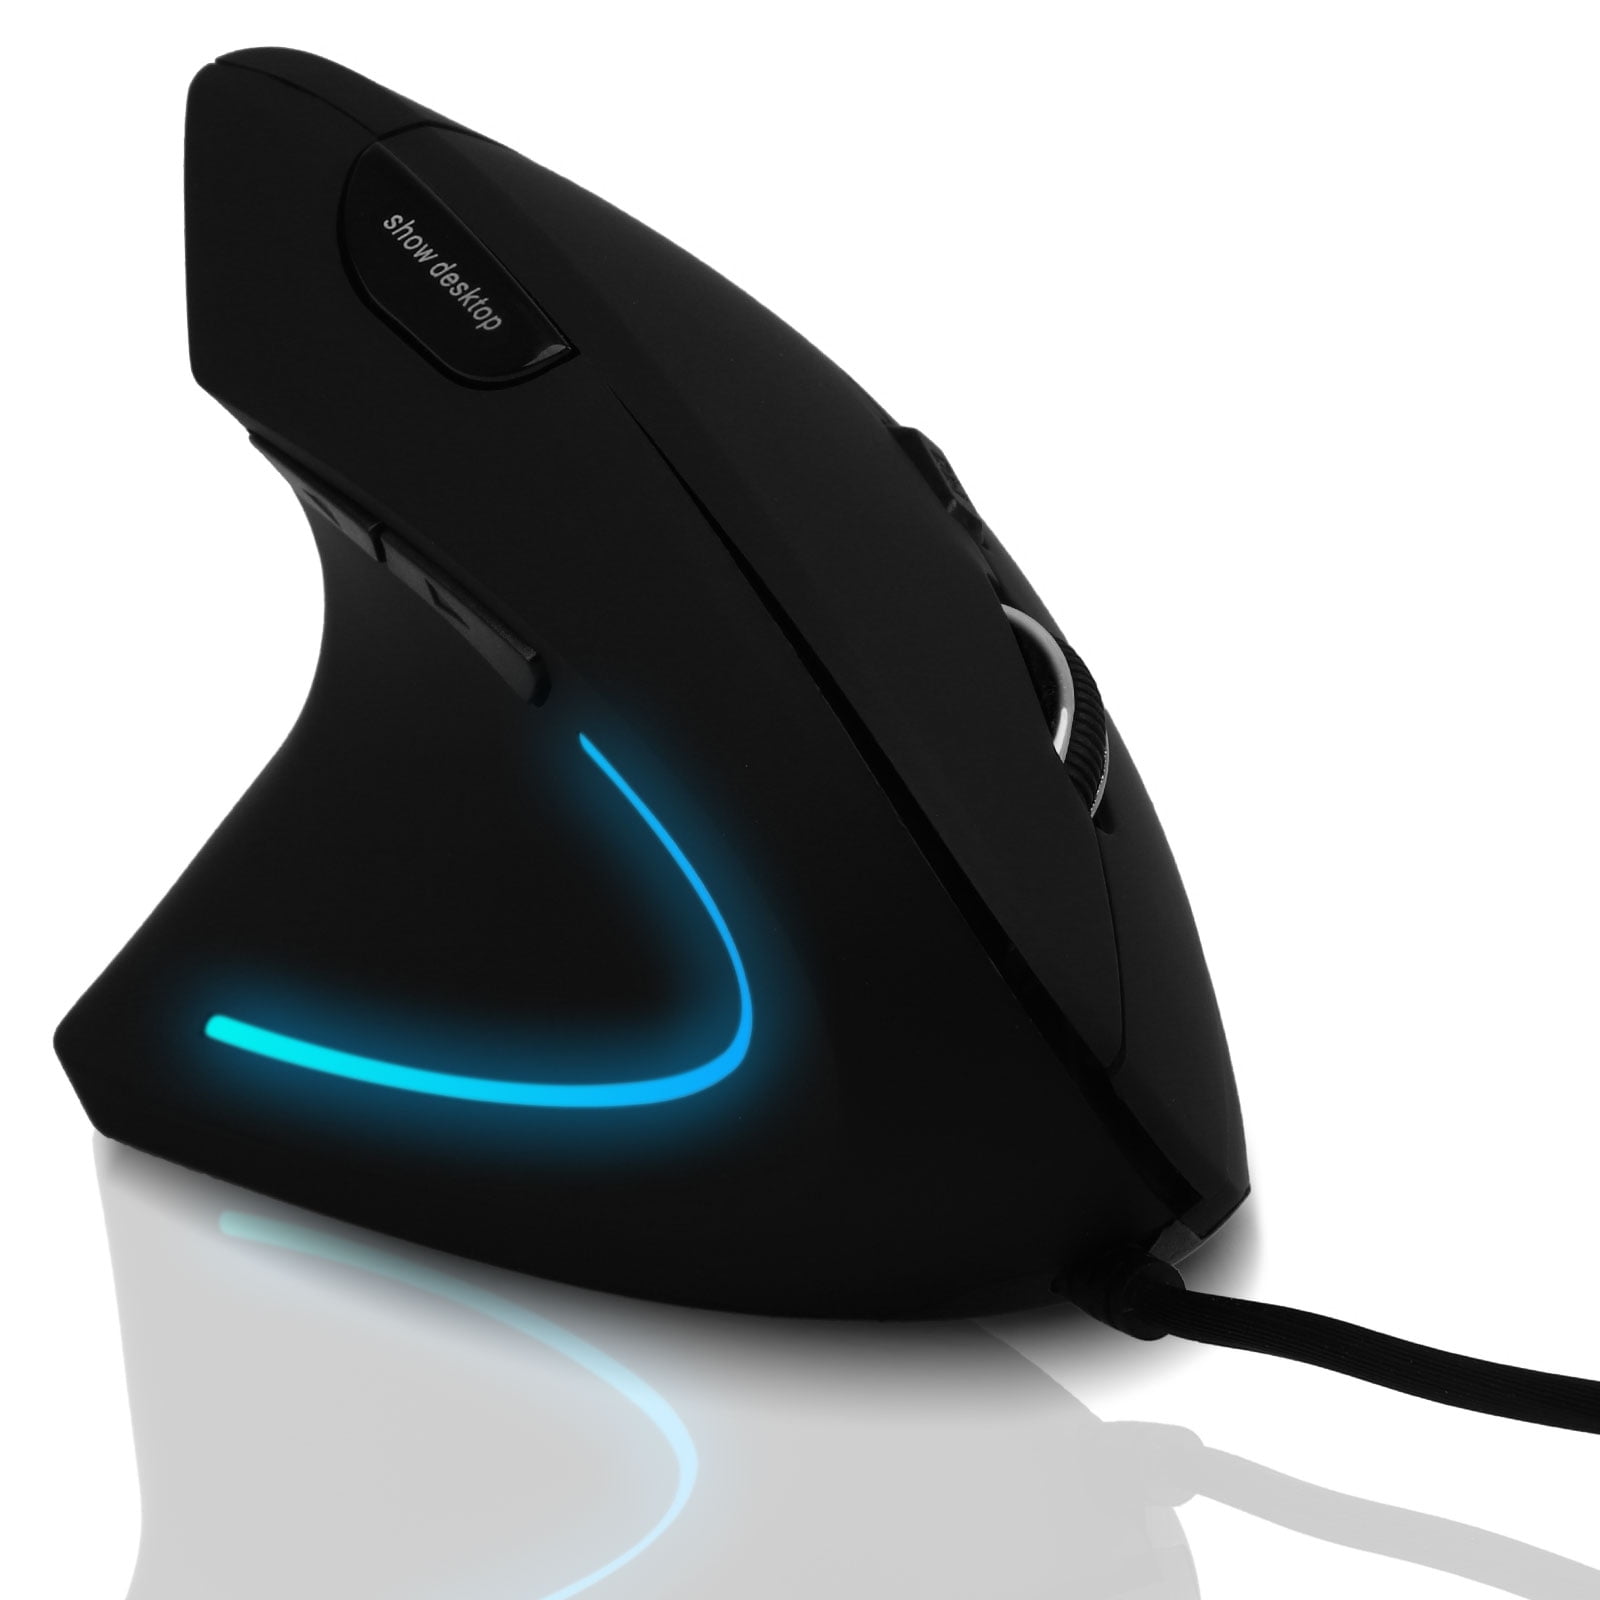 Tsv Wired Vertical Ergonomic Mouse 6 Buttons Optical Ergo Mouse With 4